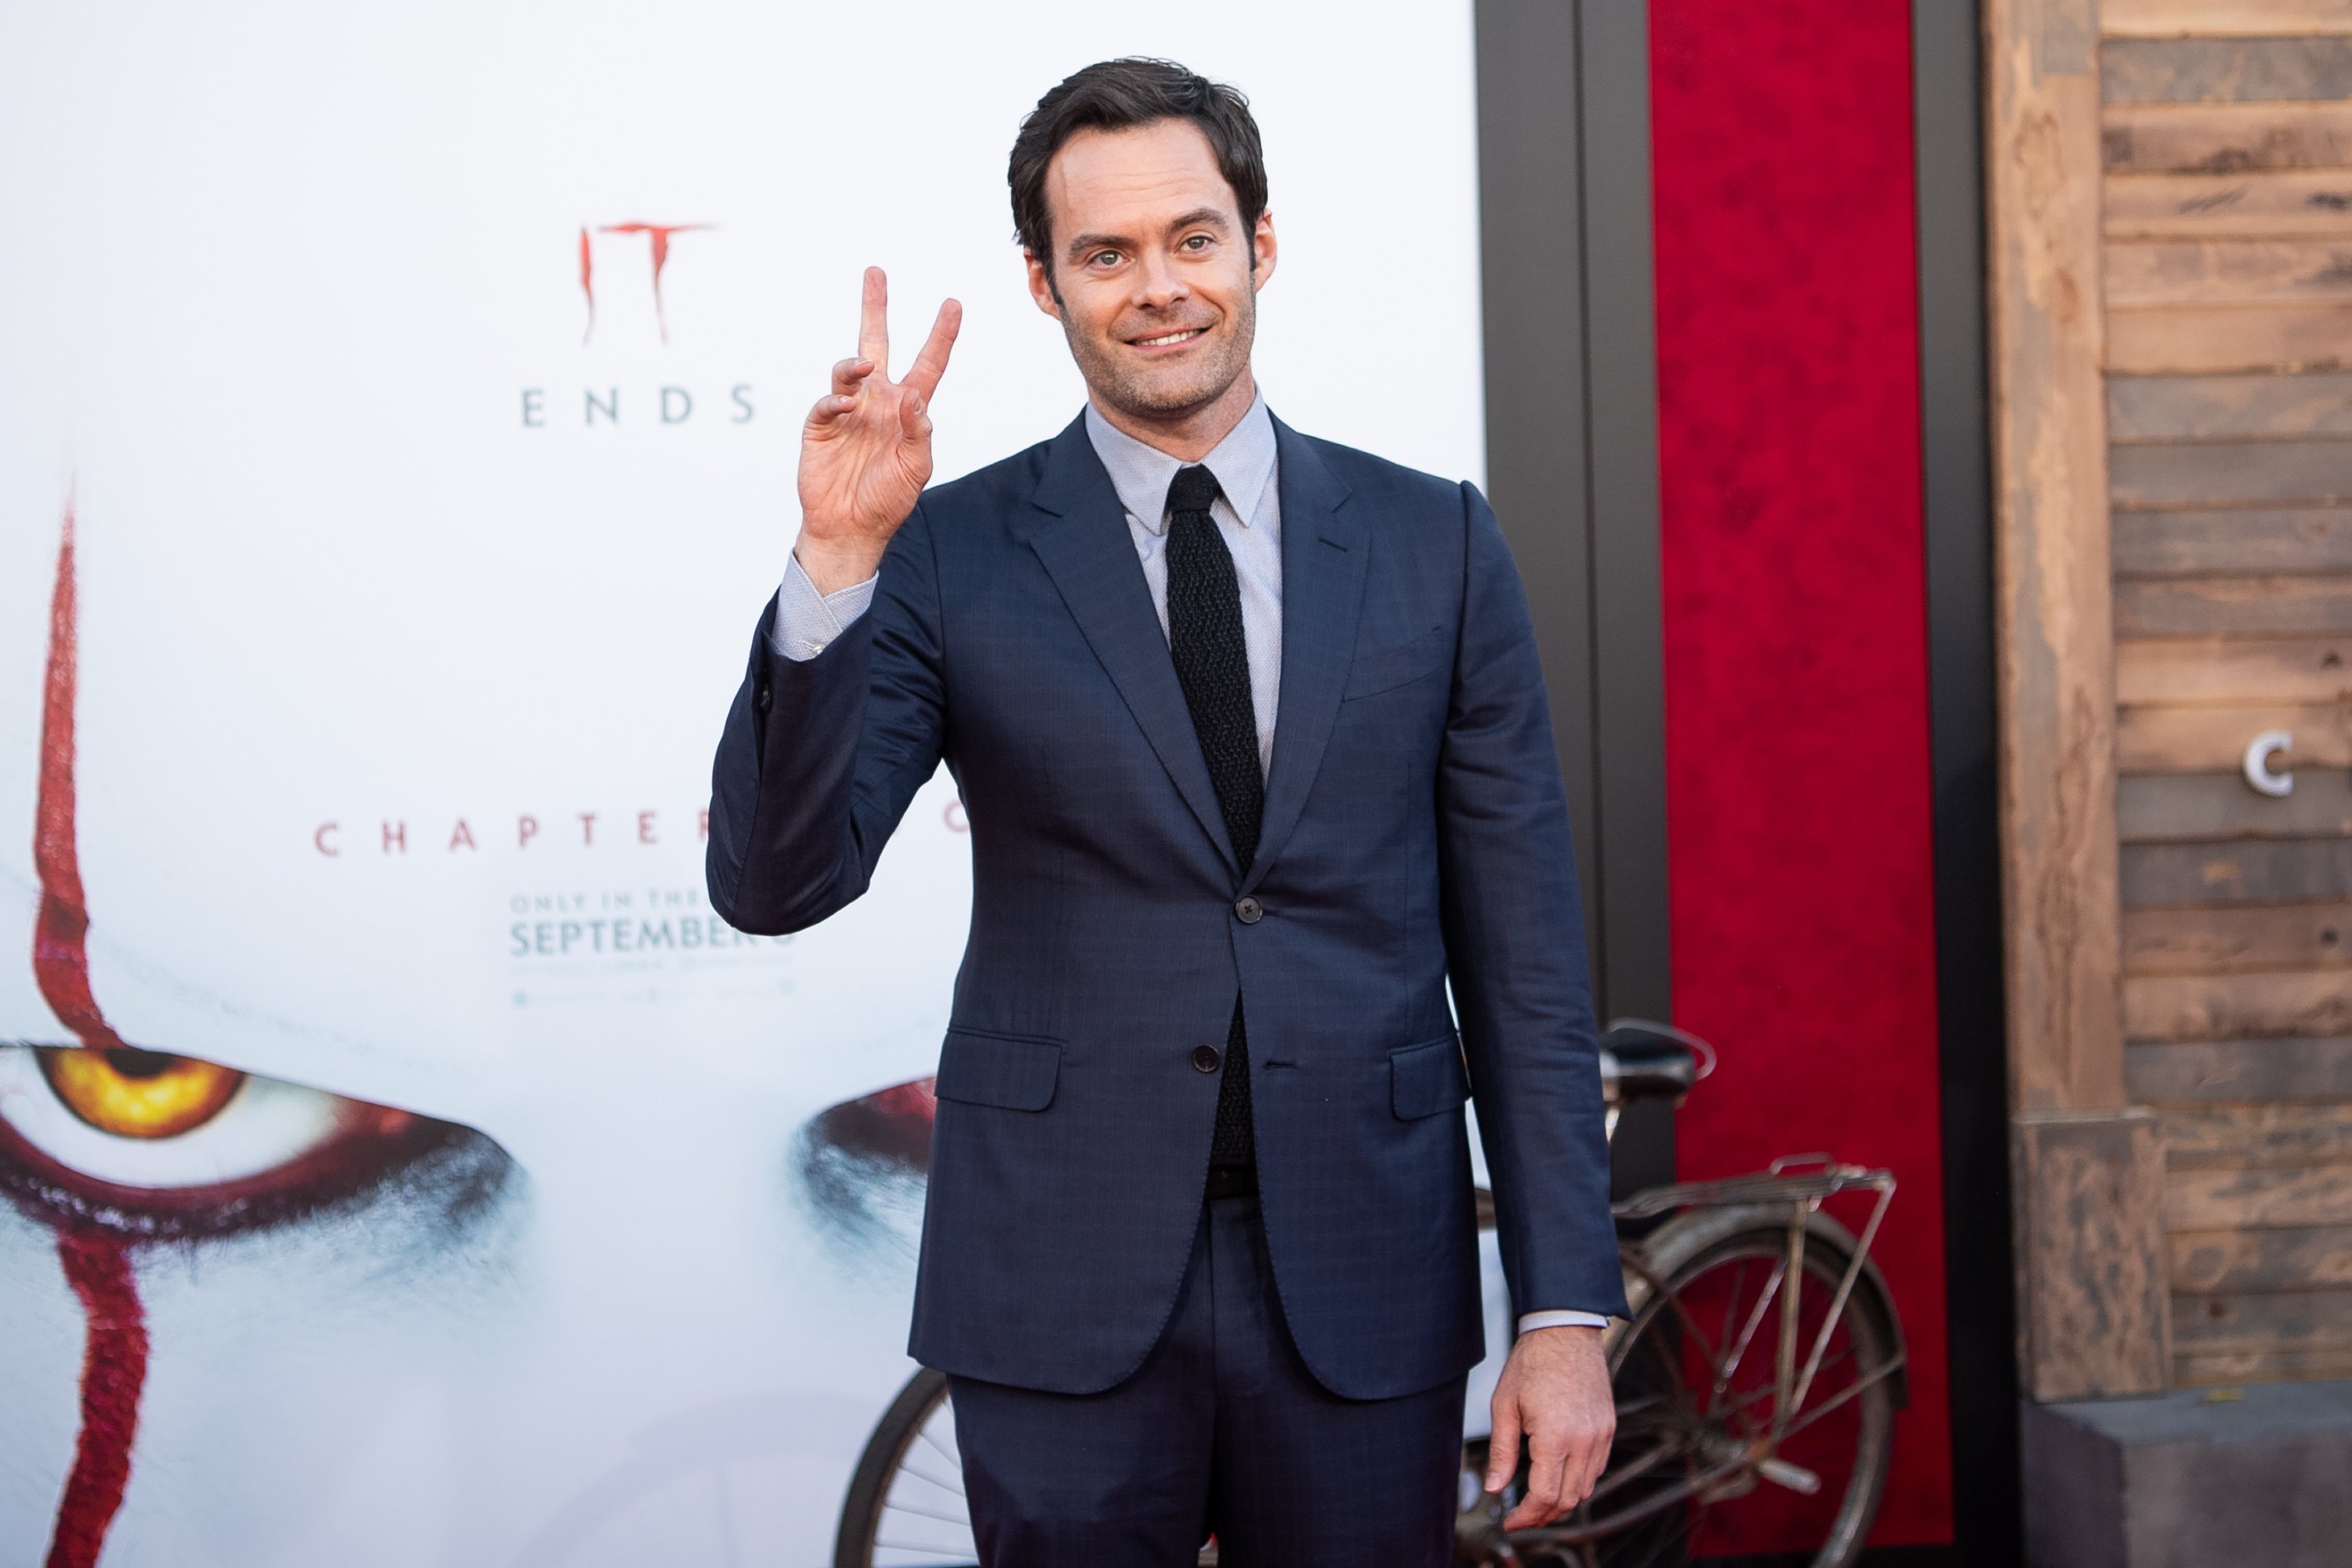 Bill Hader attends the premiere of Warner Bros. Pictures "It Chapter Two" at Regency Village Theatre on August 26, 2019 in Westwood, California. | Source: Getty Images